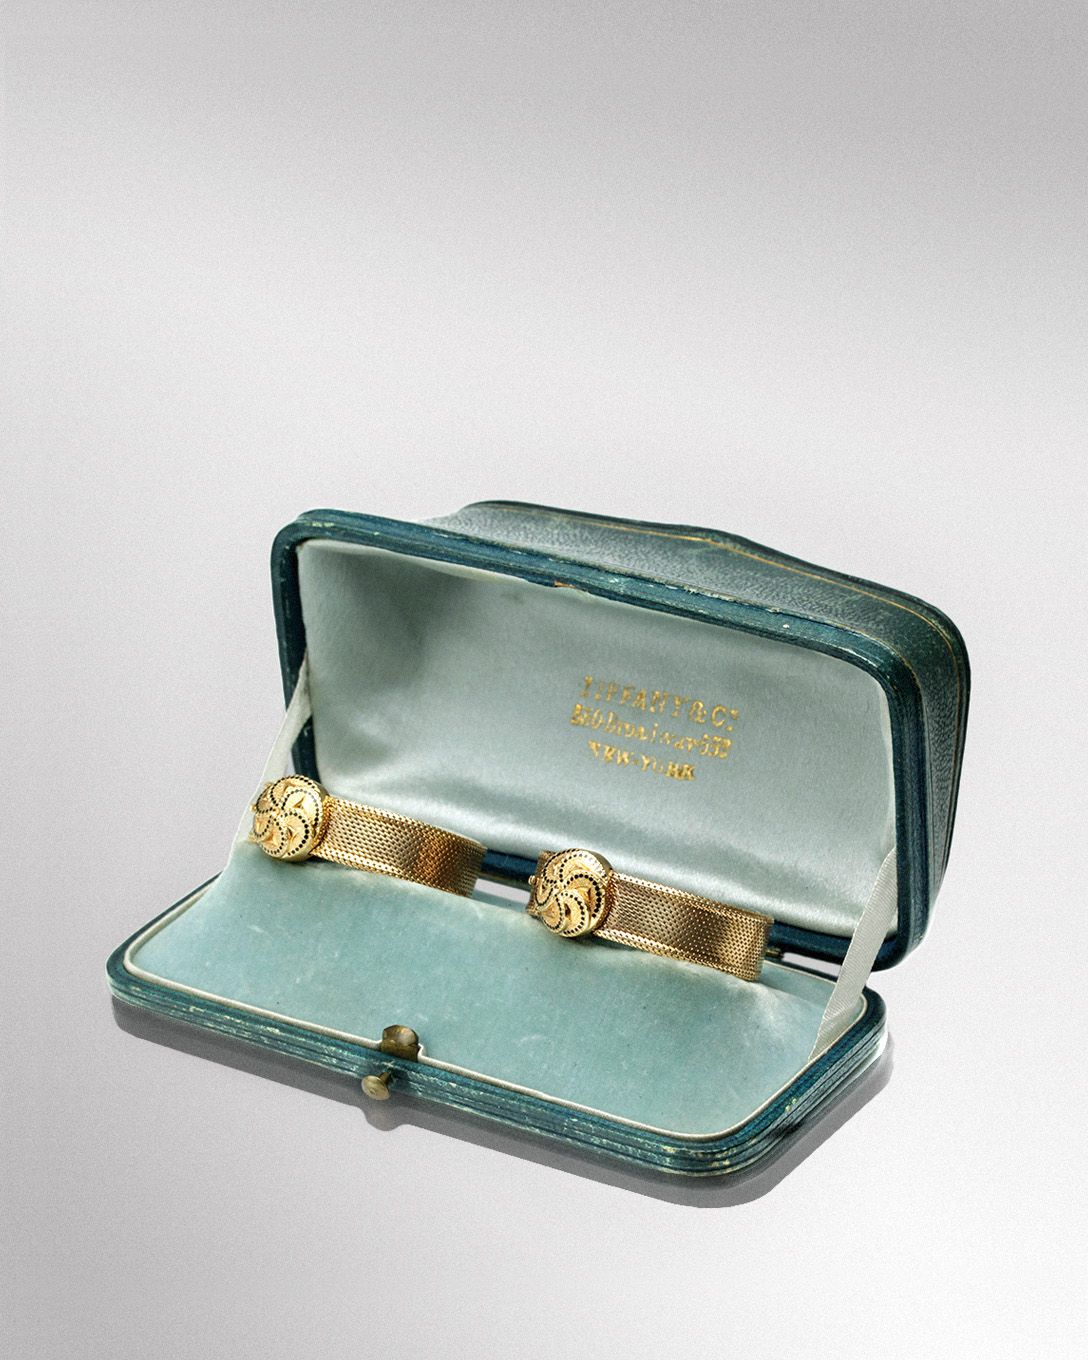 The Tiffany & Co. Timeline